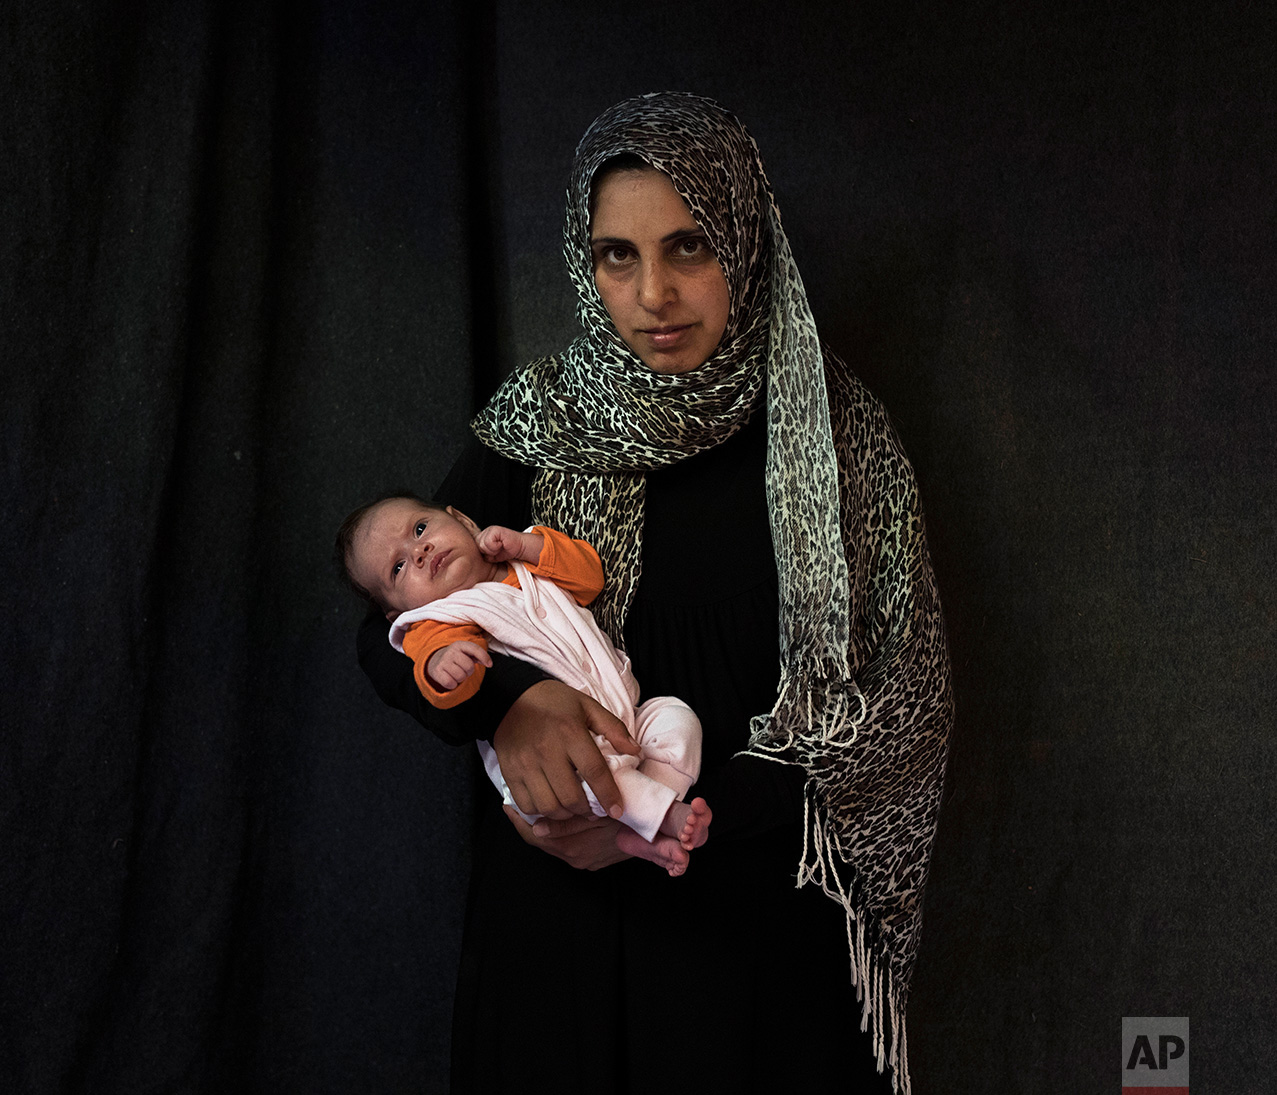  In this Tuesday Sept. 13, 2016 photo 35-year-old Siha Hamnad, a Syrian mother from Al Qunaytirah, poses with her baby girl Mona Alzaour in a tent made of blankets given by UNCHR at the Ritsona refugee camp in Greece. Siha is one of the hundreds of r